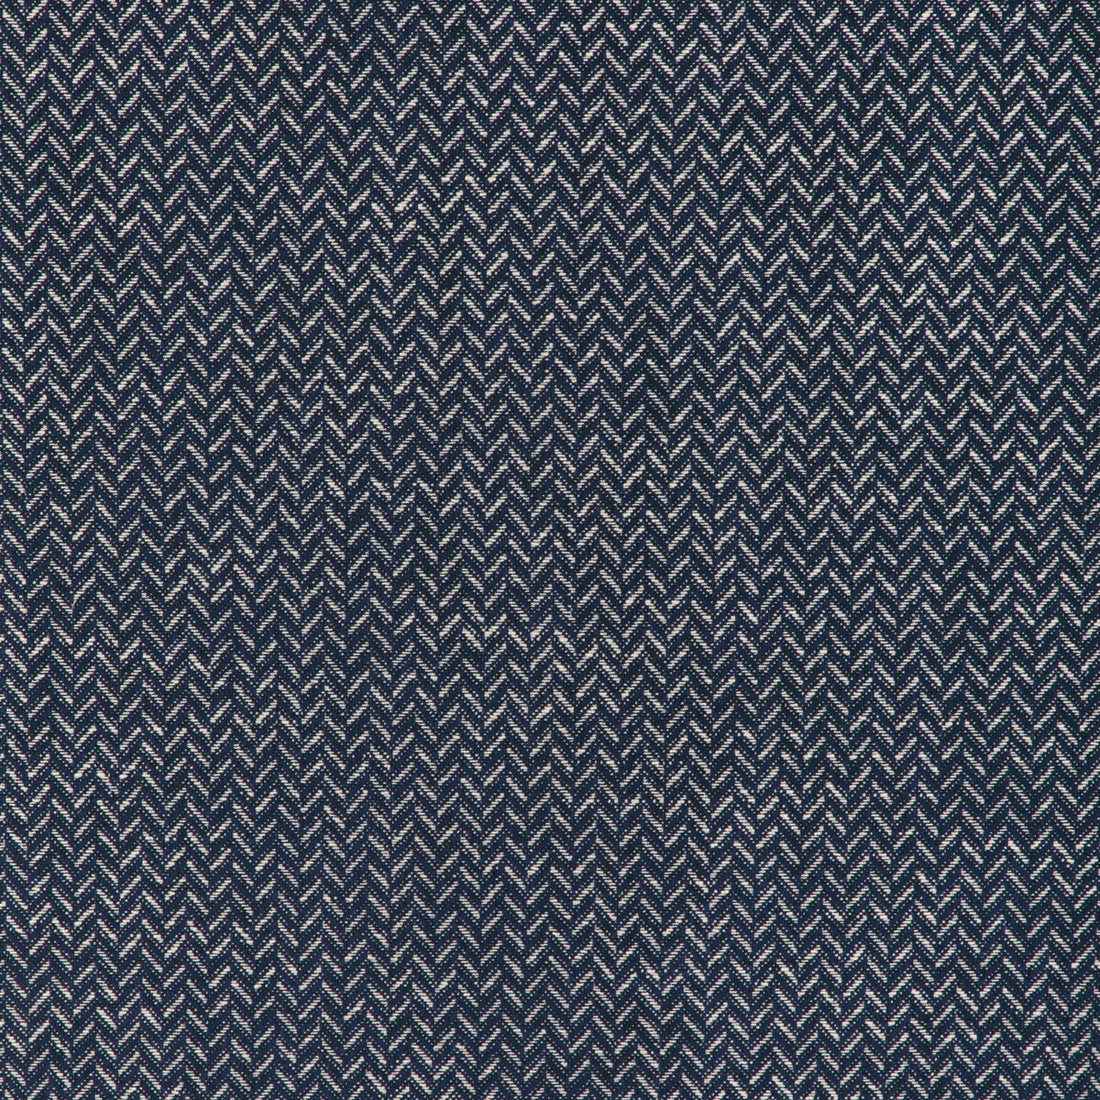 Kravet Design fabric in 37195-50 color - pattern 37195.50.0 - by Kravet Design in the Woven Colors collection